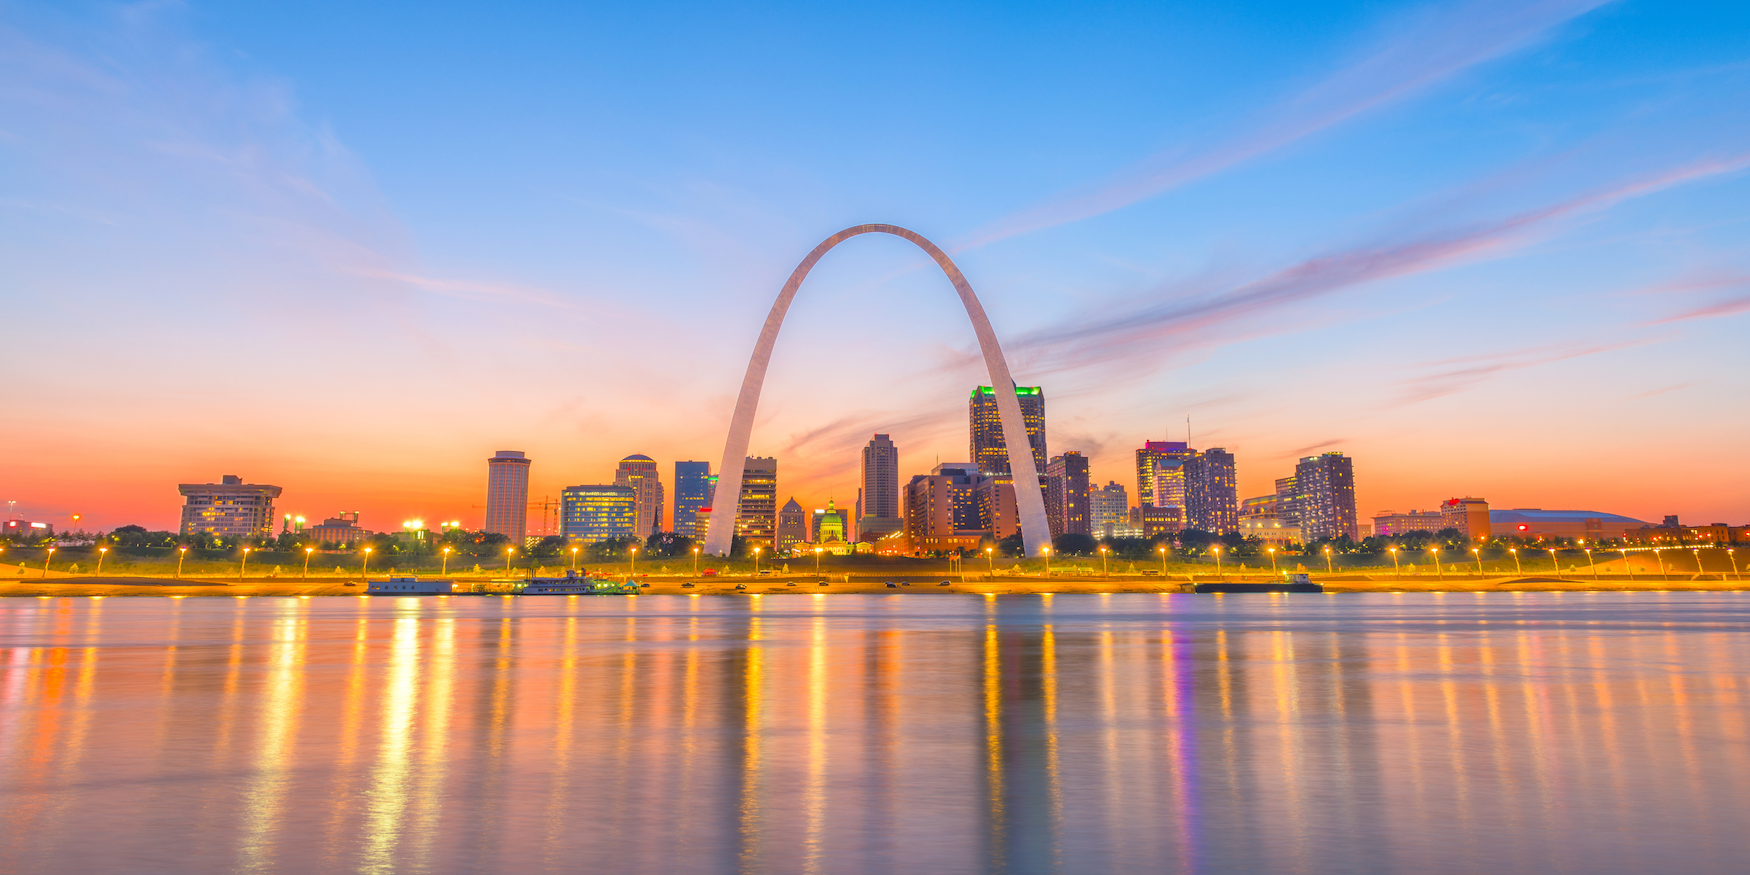 St. Louis Archway and skyline.